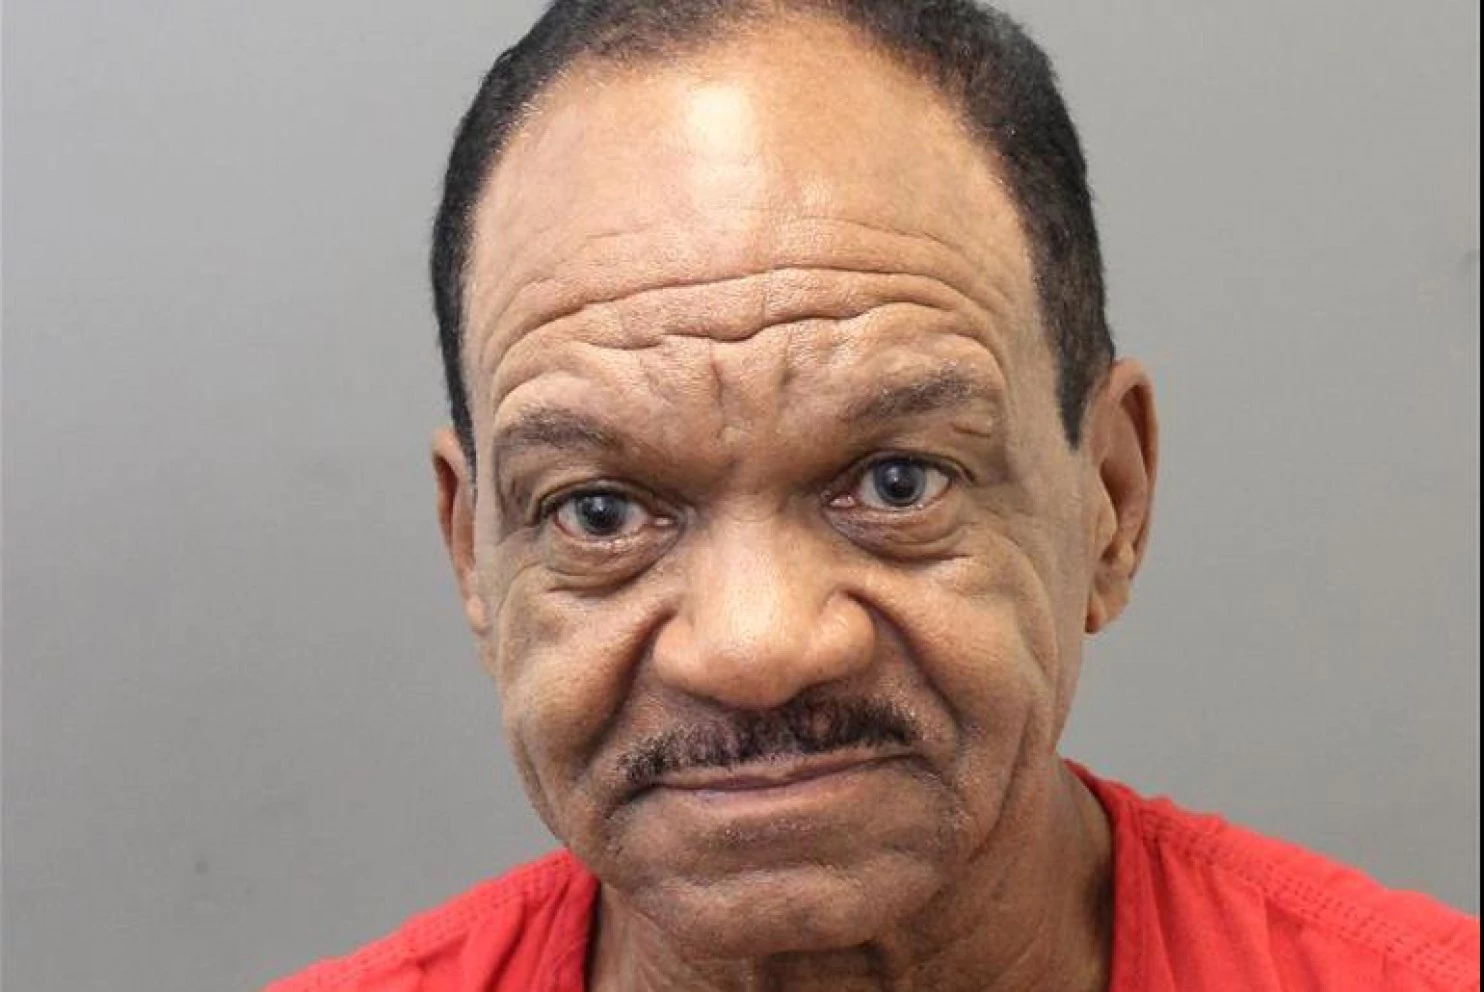 Walter E. Fauntroy Civil rights leader Walter Fauntroy arrested at Dulles International